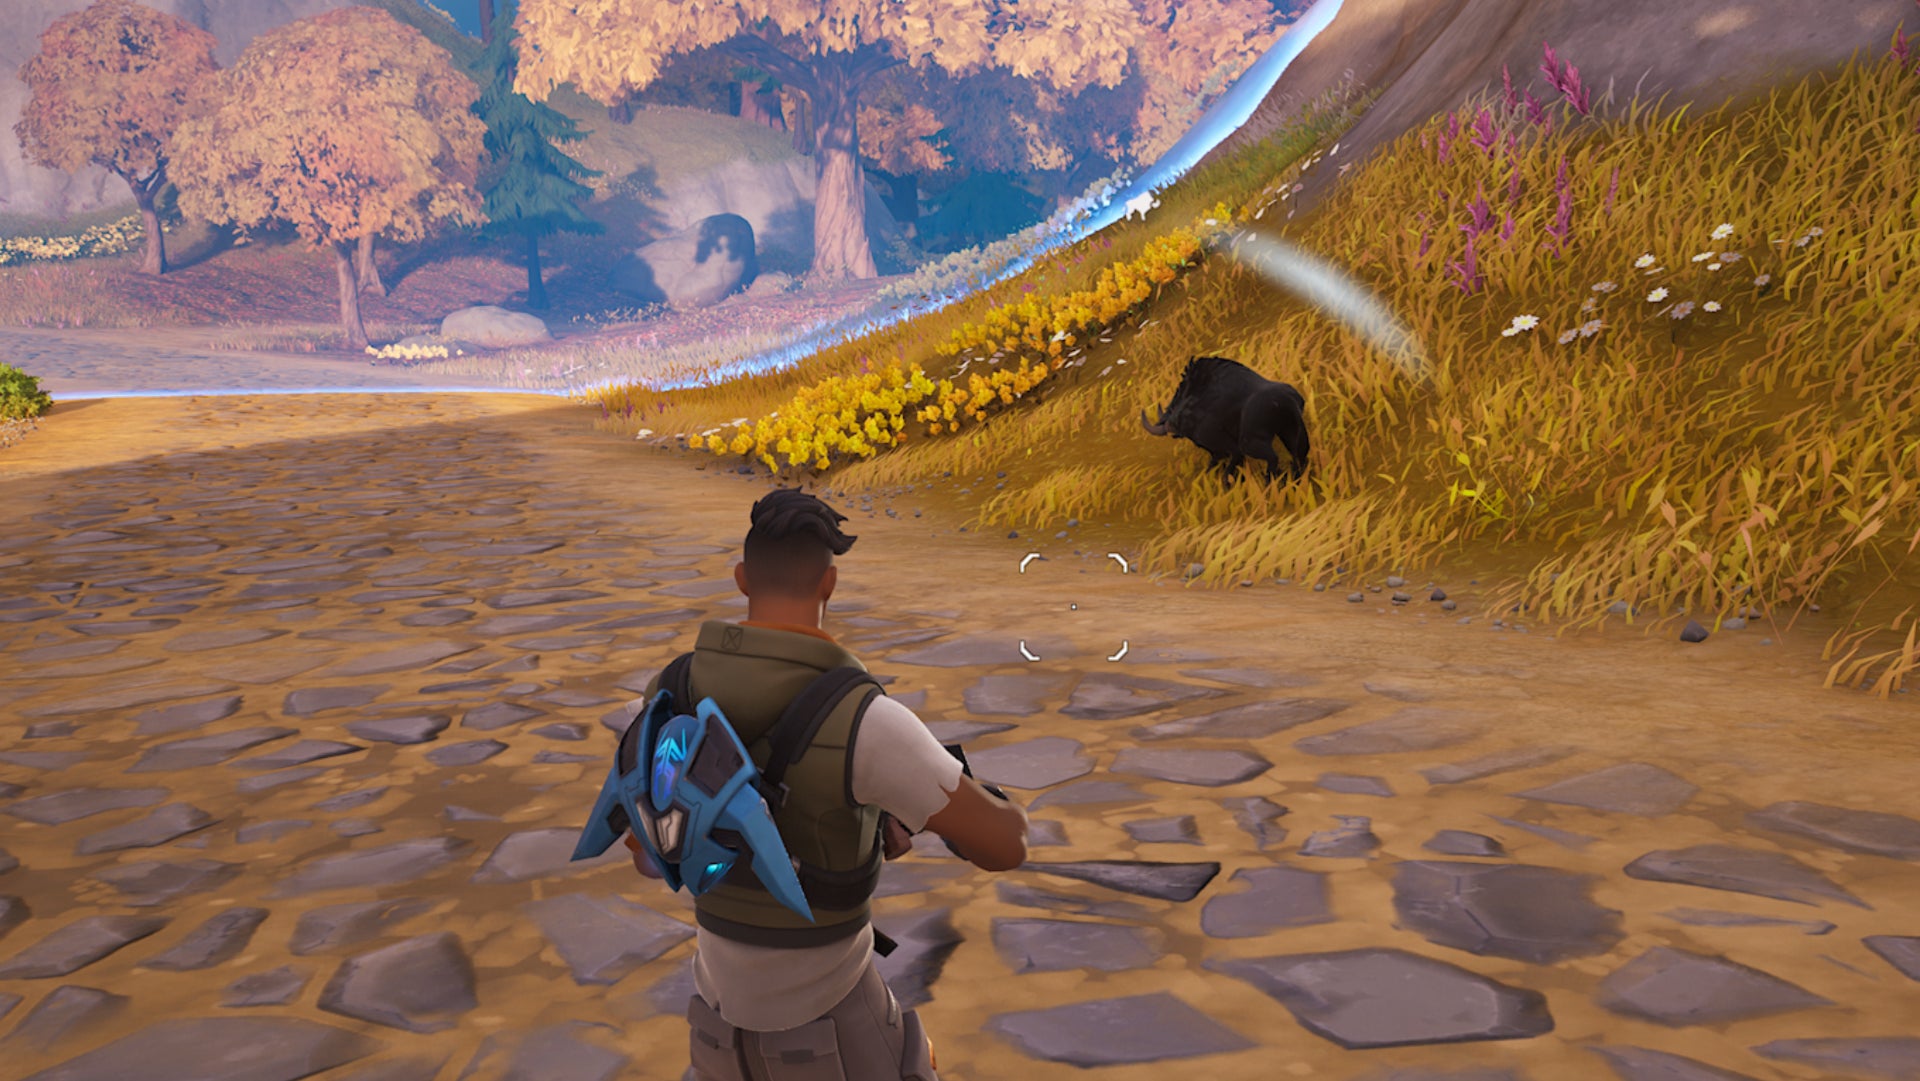 Fornite, a character is facing a Boar that is standing near the edge of the storm.